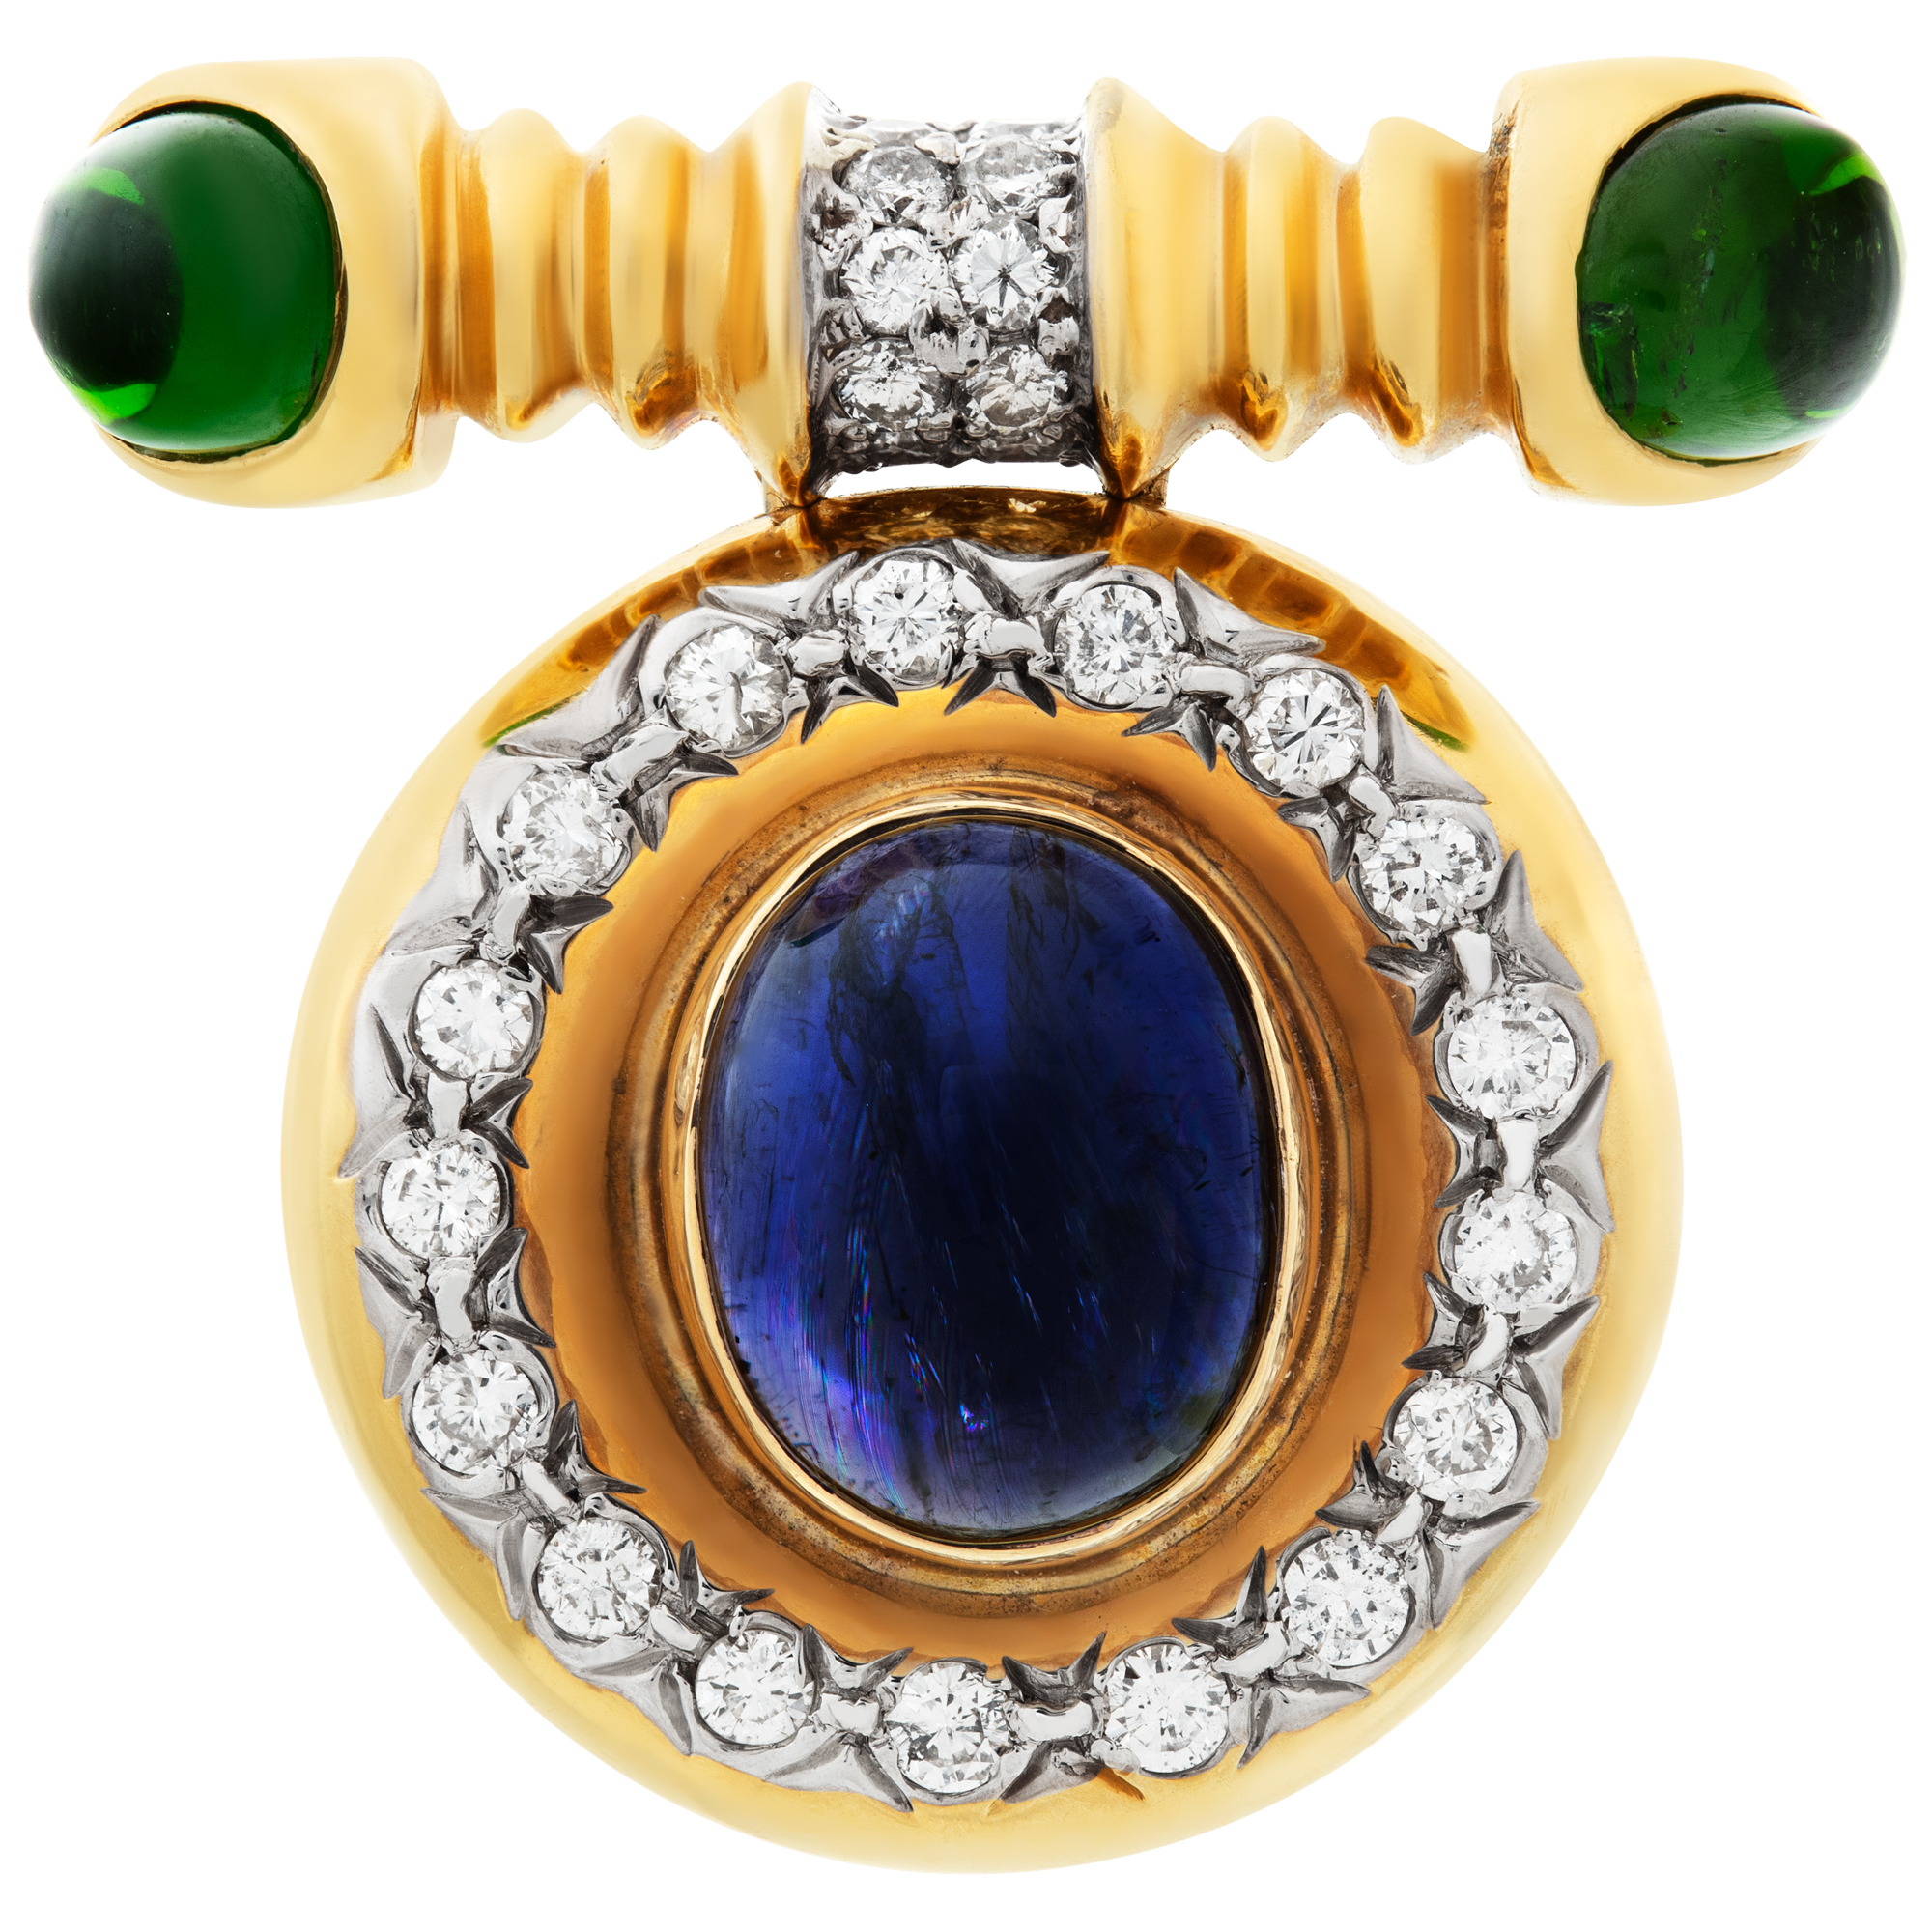 Oval cabochon sapphire, oval cabocho green tourmalime and diamonds brooch/enhancer set in 14K yellow gold. image 1